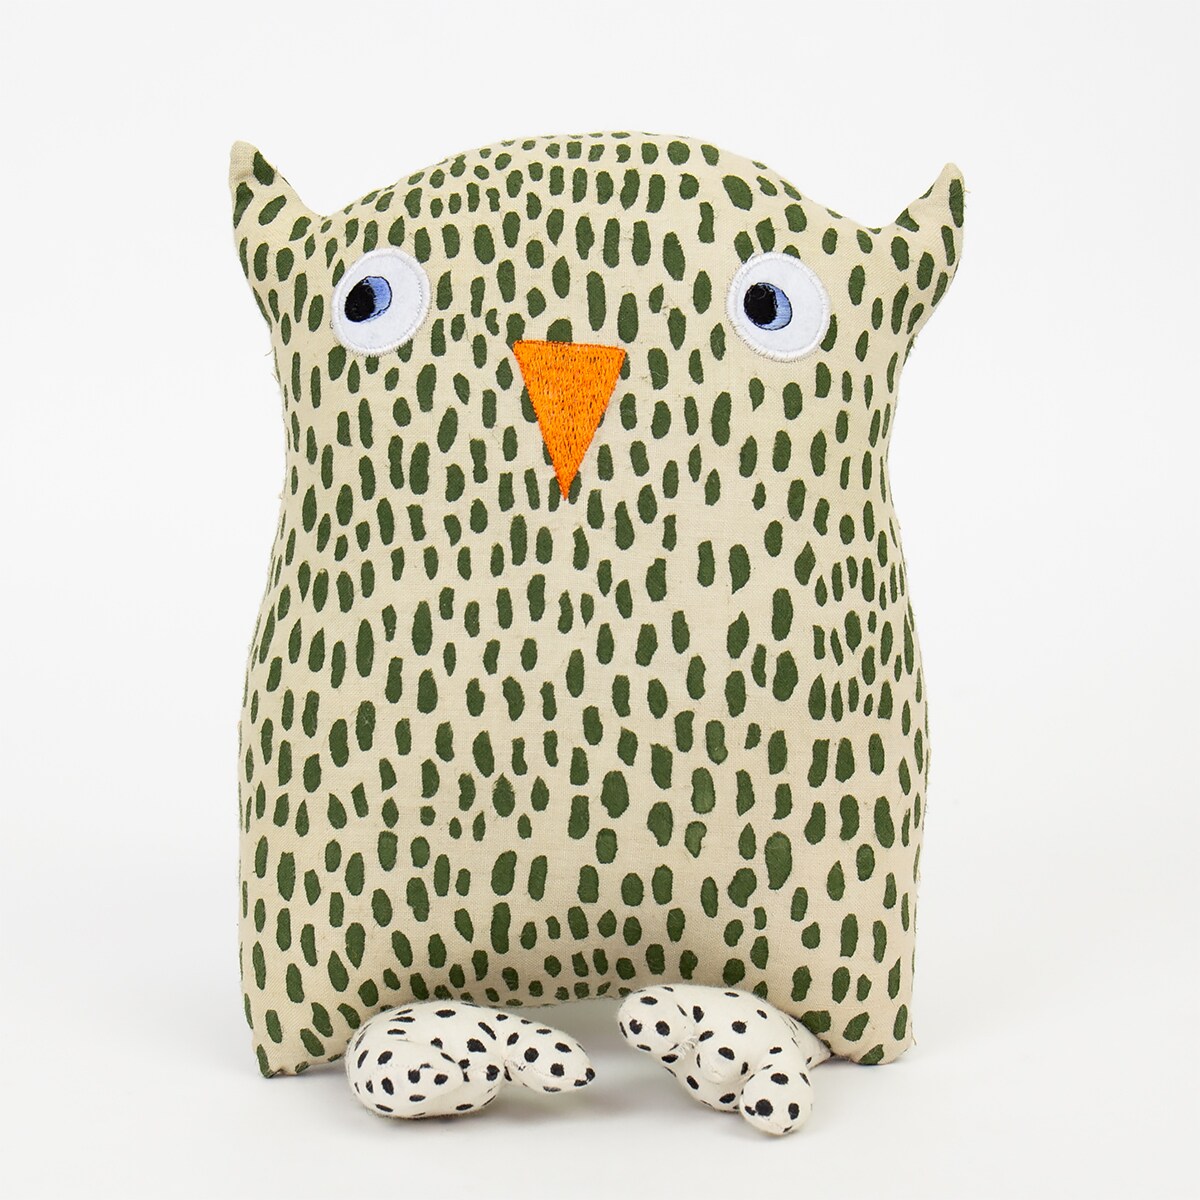 OWL STORM Softtoy